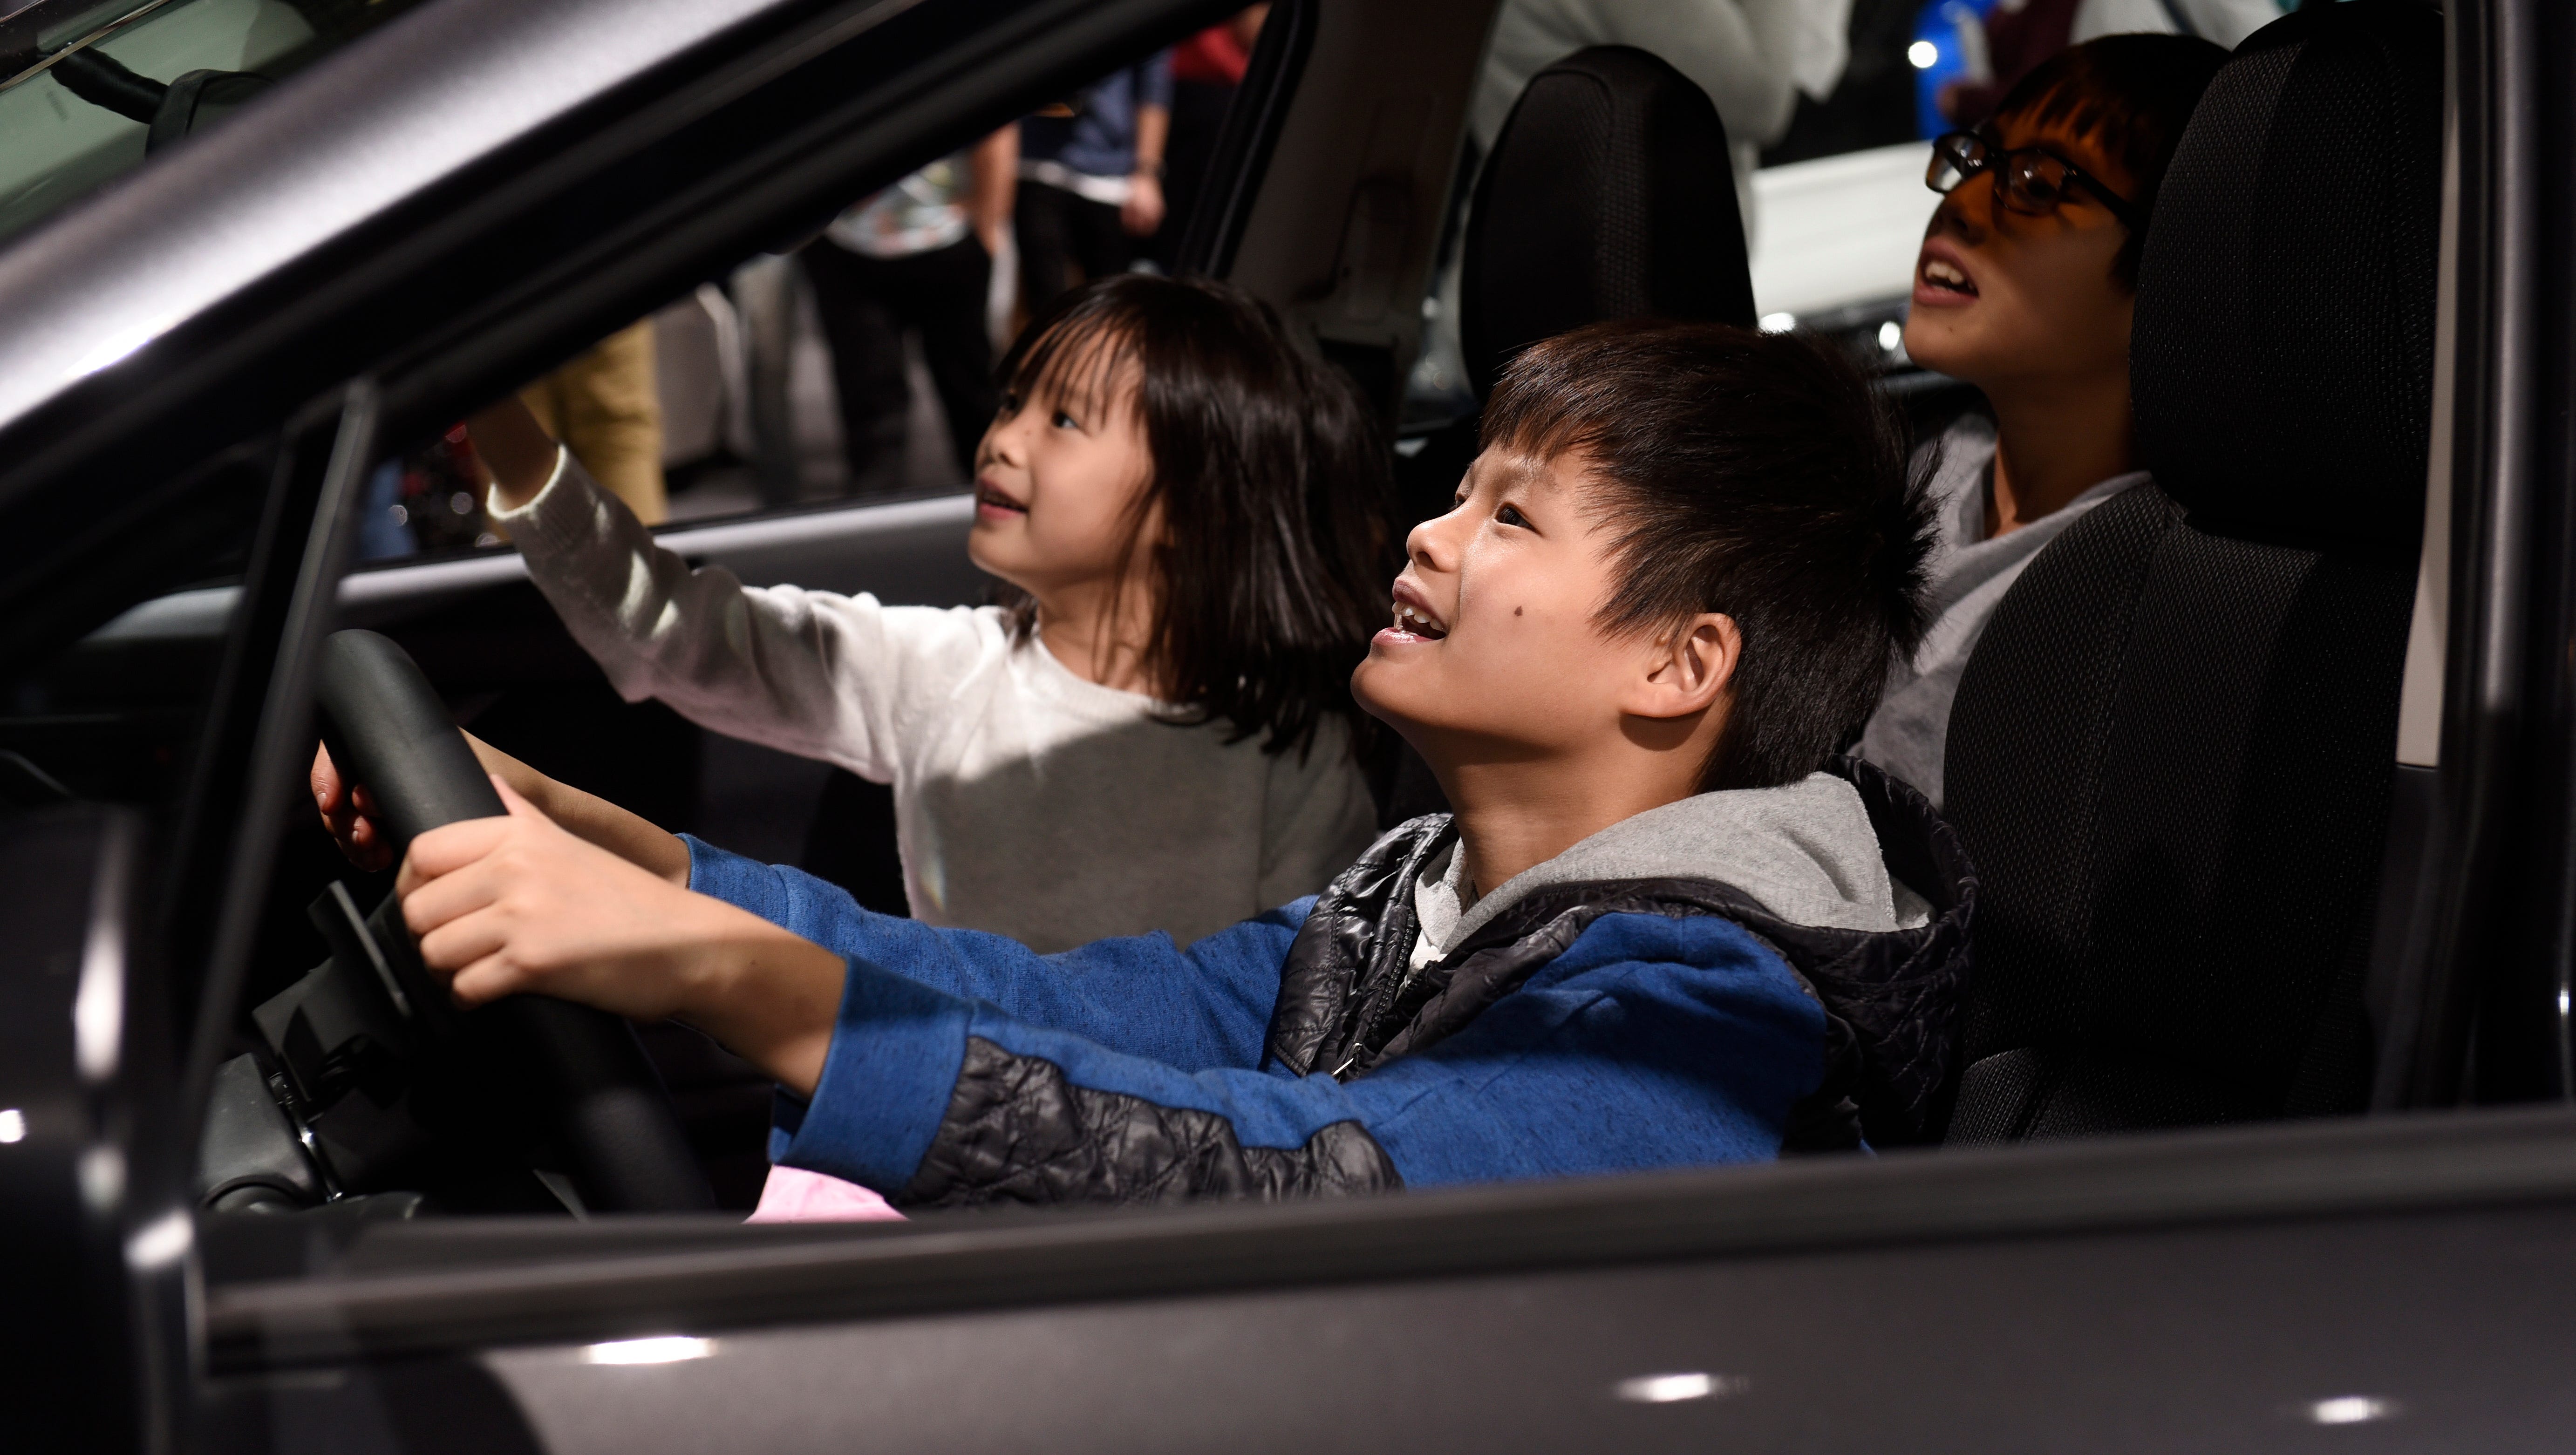 Ronny Le, 9, and his sister Luci Le, 5, of Southfield, check out the interior of the 2018 Subaru Impreza.